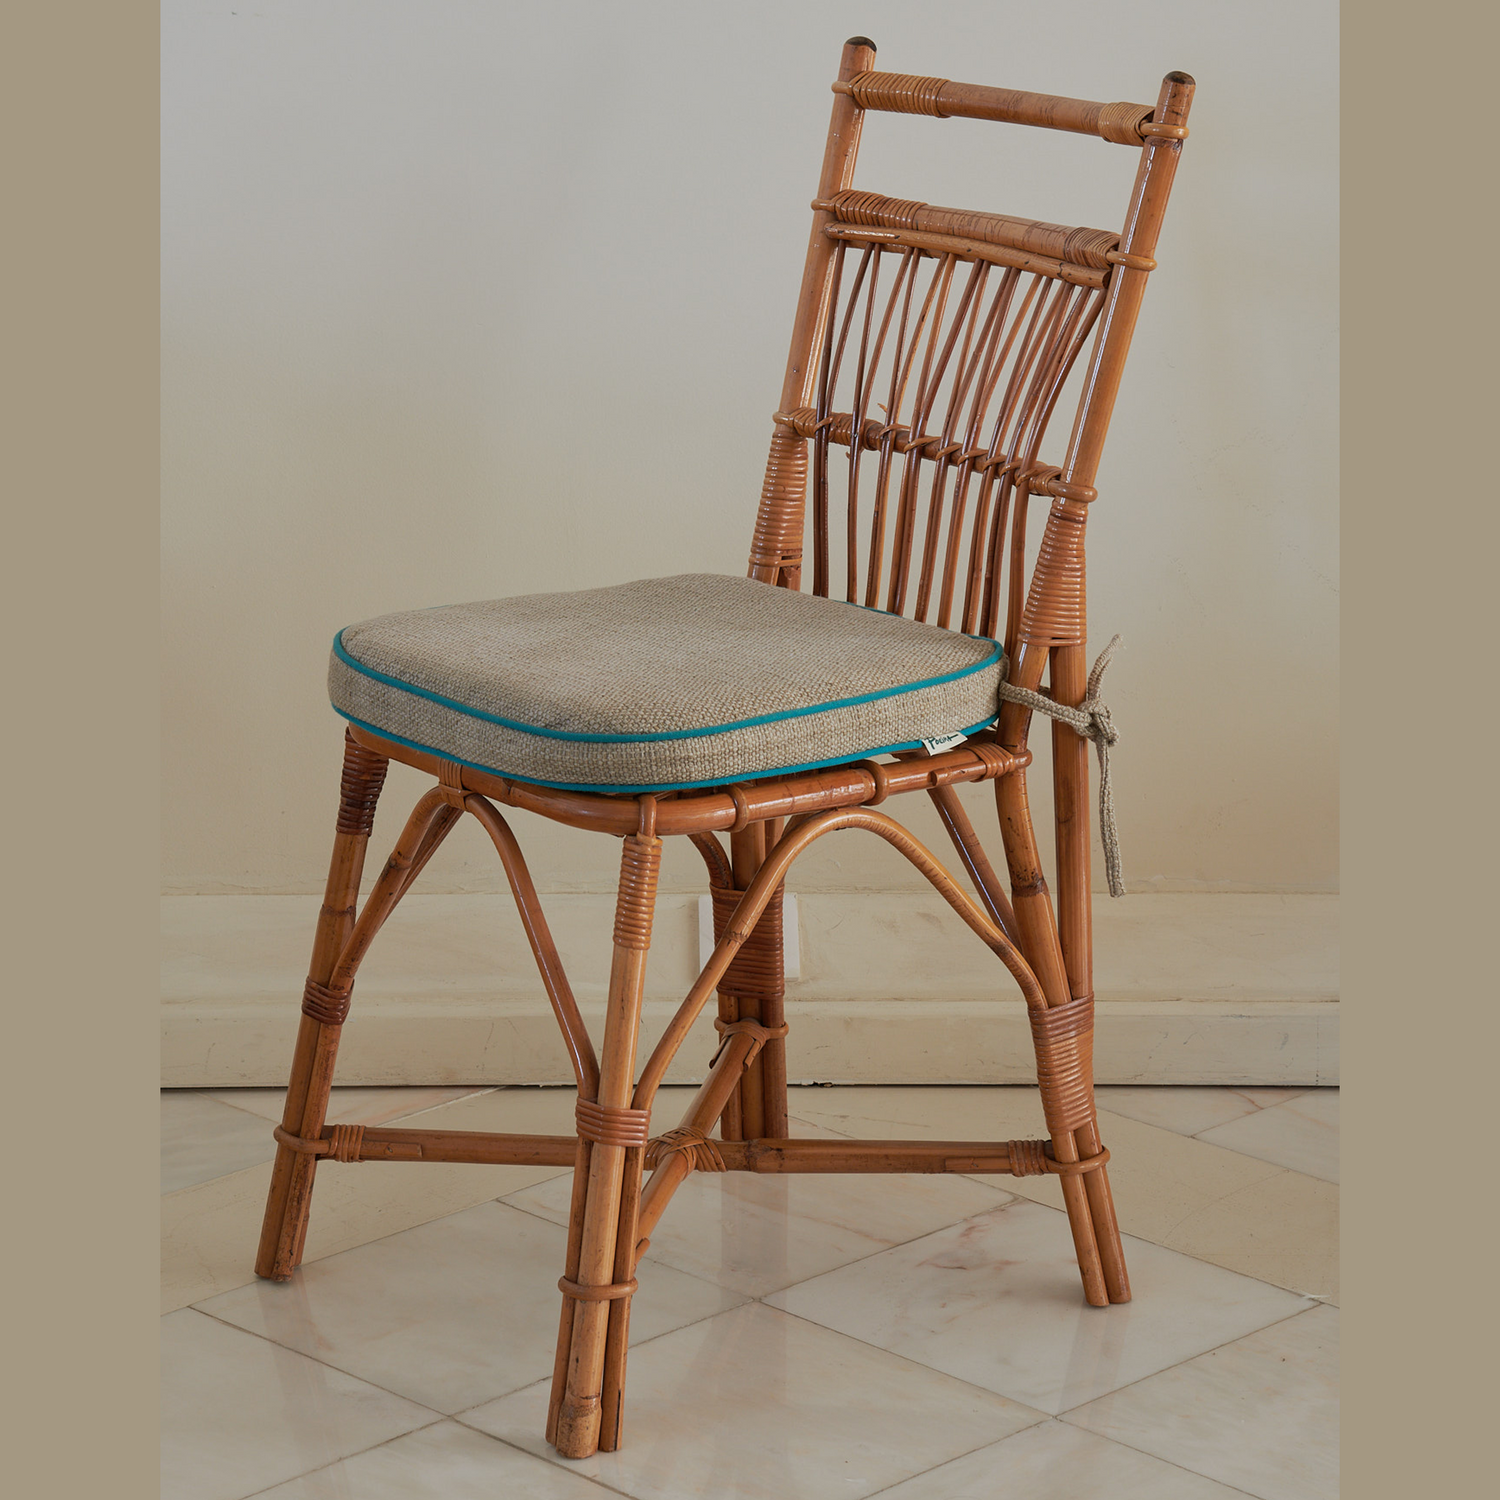 Vintage Bamboo Chair and Cushion